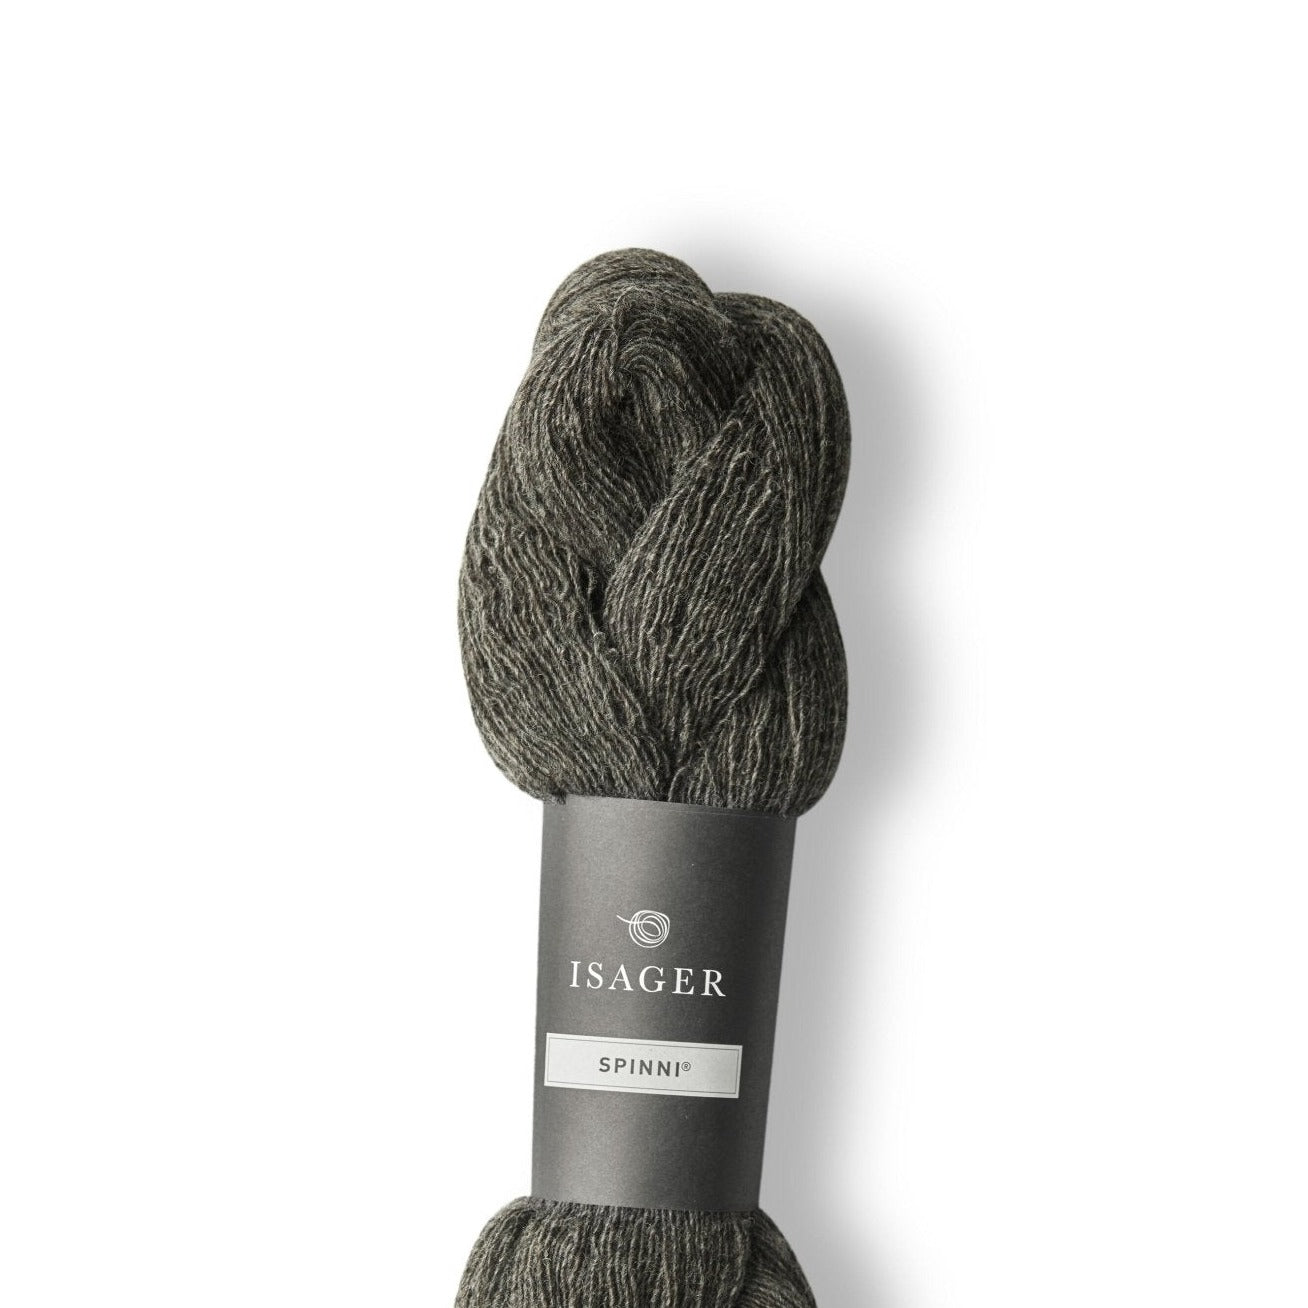 Isager Spinni - 4s - 2 Ply - Isager - The Little Yarn Store